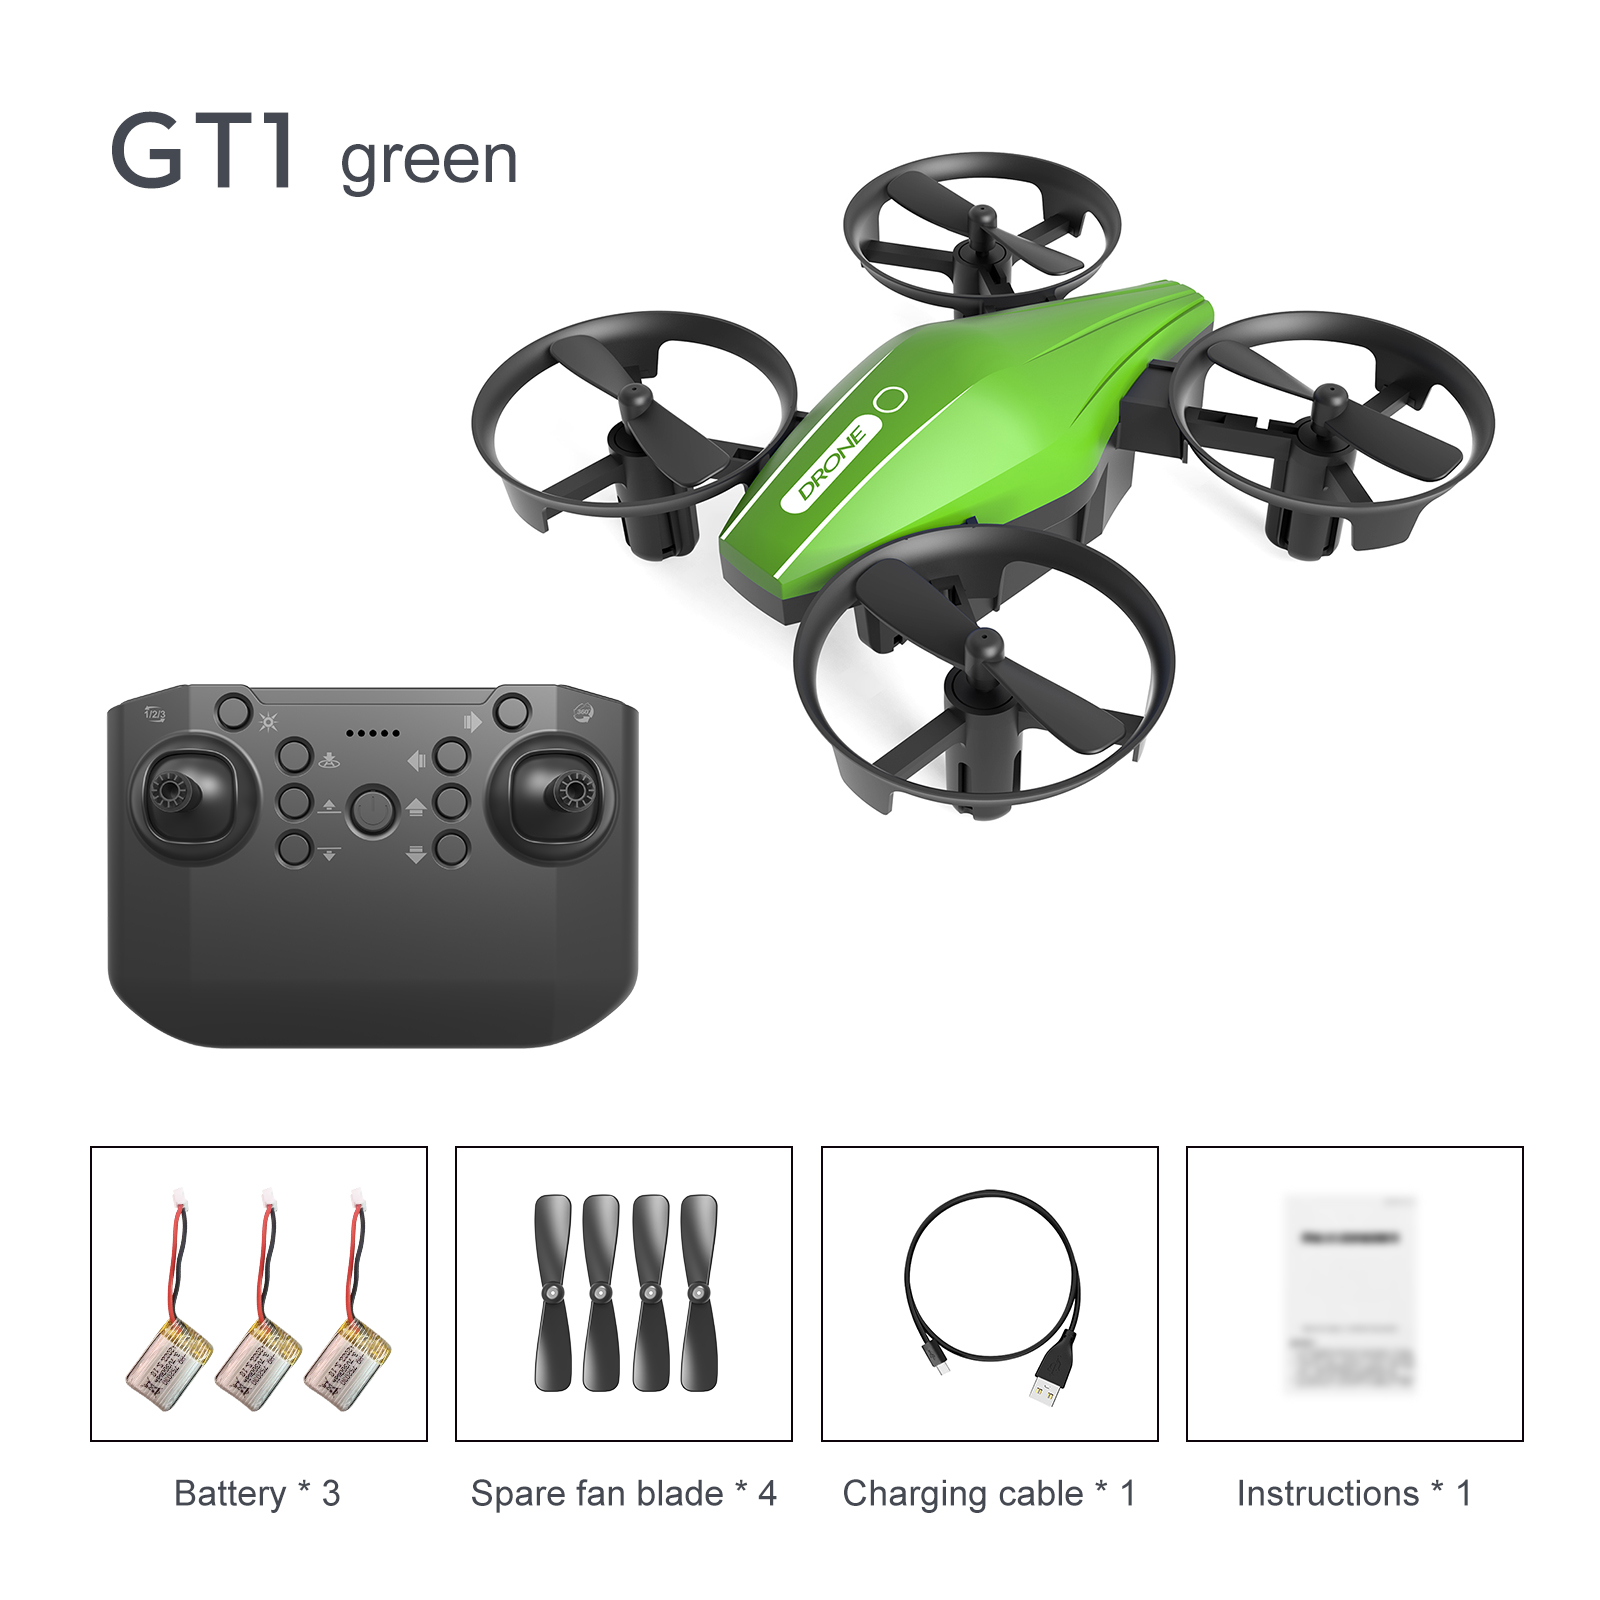 Mini 2.4g Remote Control Drone 4-channel 6-axis Quadcopter Remote Control Aircraft Toy for Boys Gifts Red 1 Battery